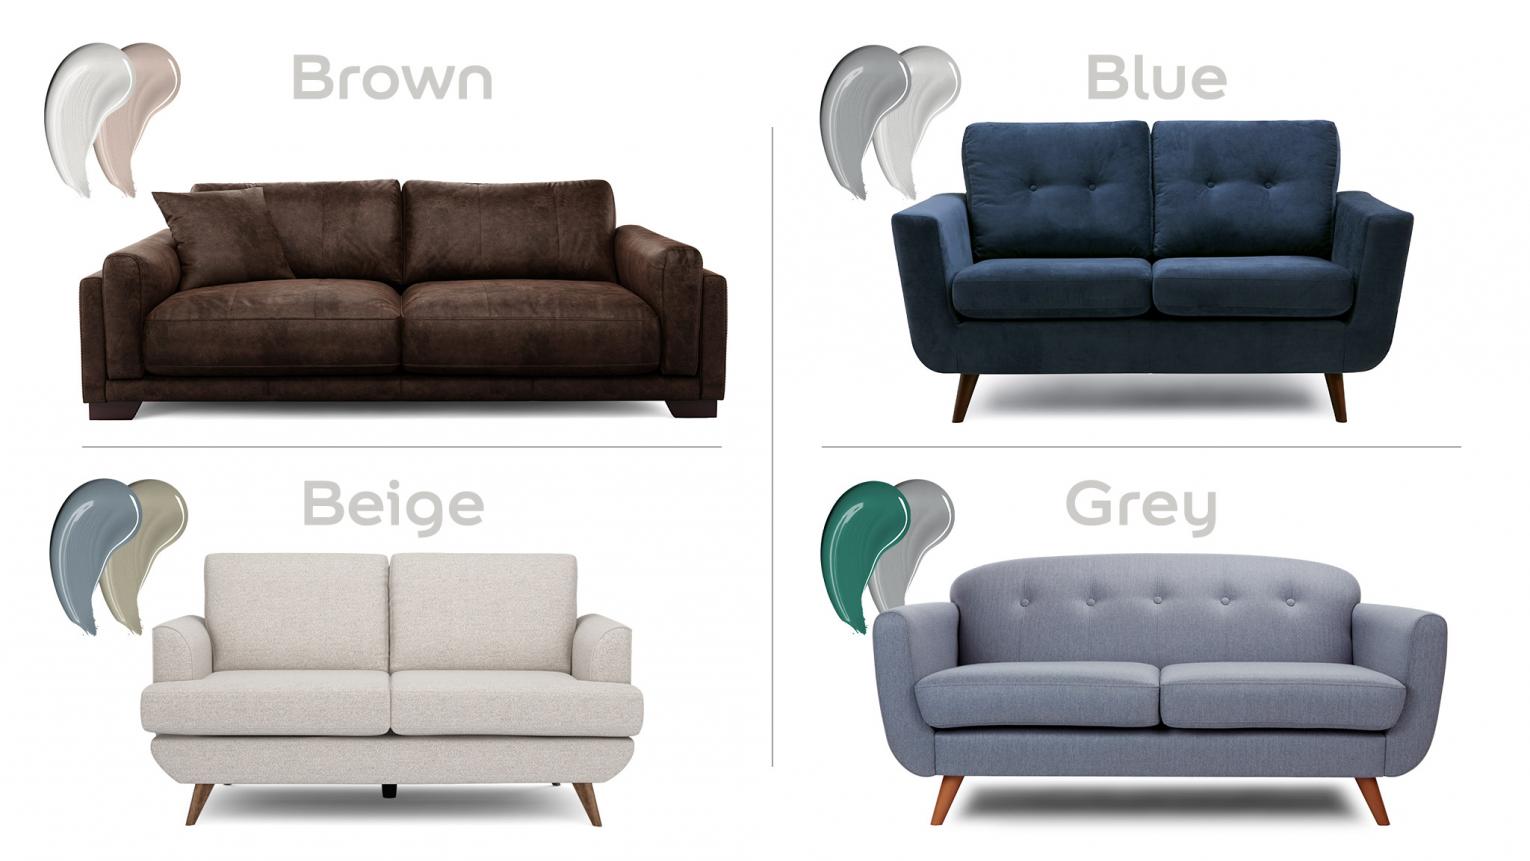 8 Paint Colours To Match Your Sofa Dulux, What Colour Goes Best With Grey Sofa